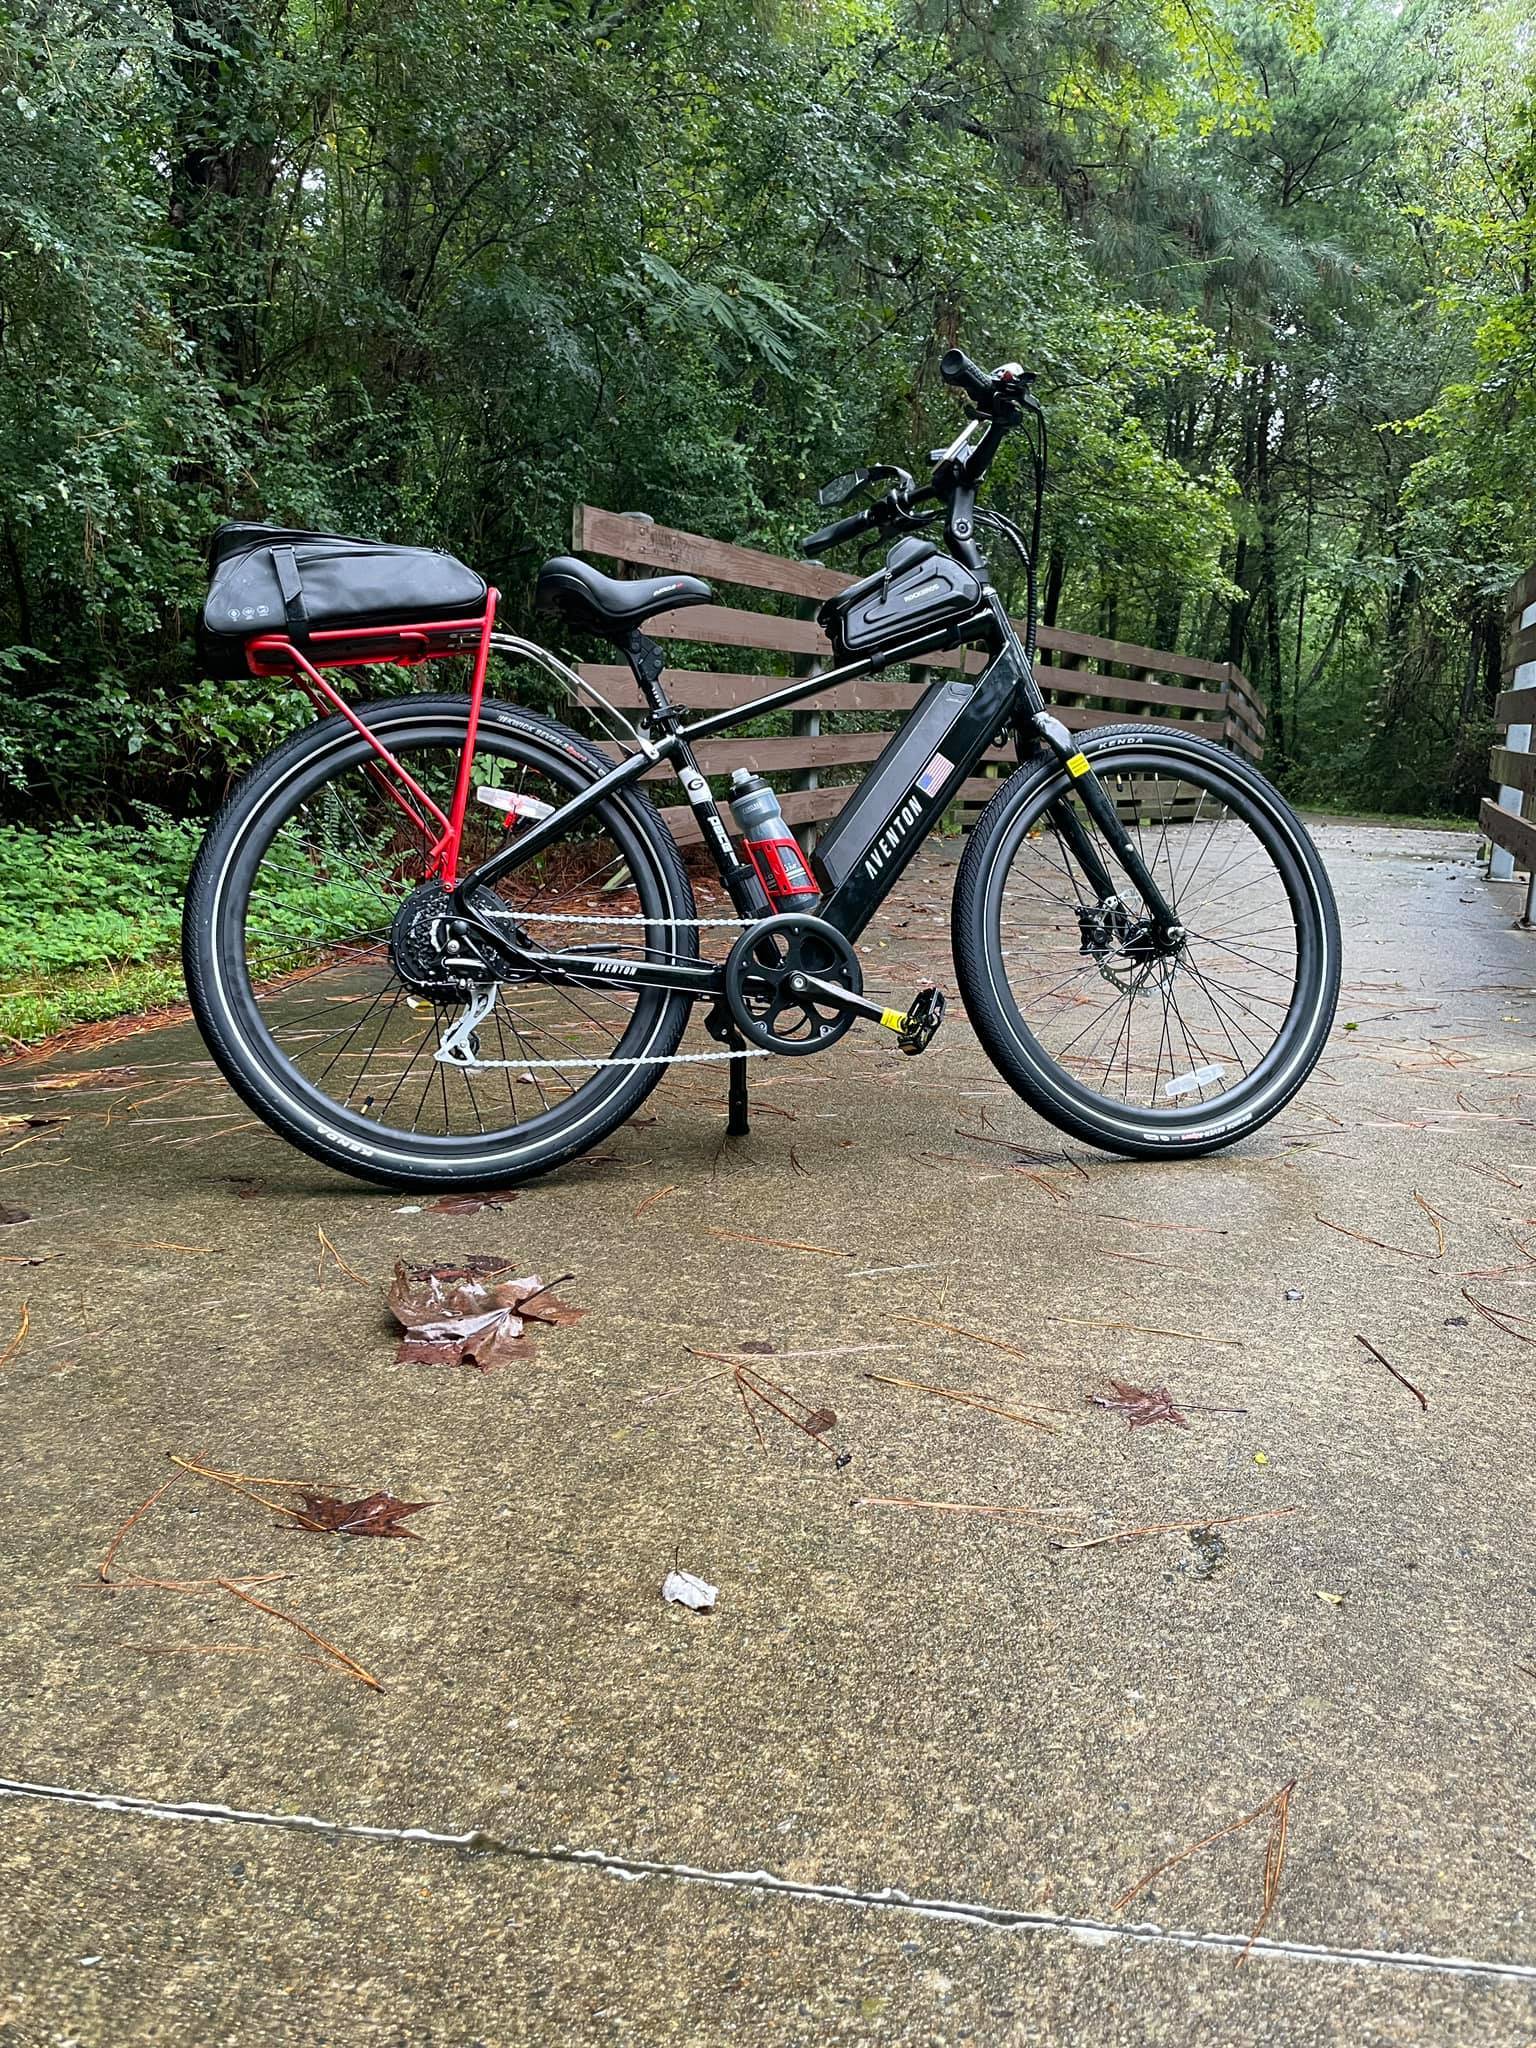 Black Aventon Level ebike with red accented rear rack and red water bottle holder.